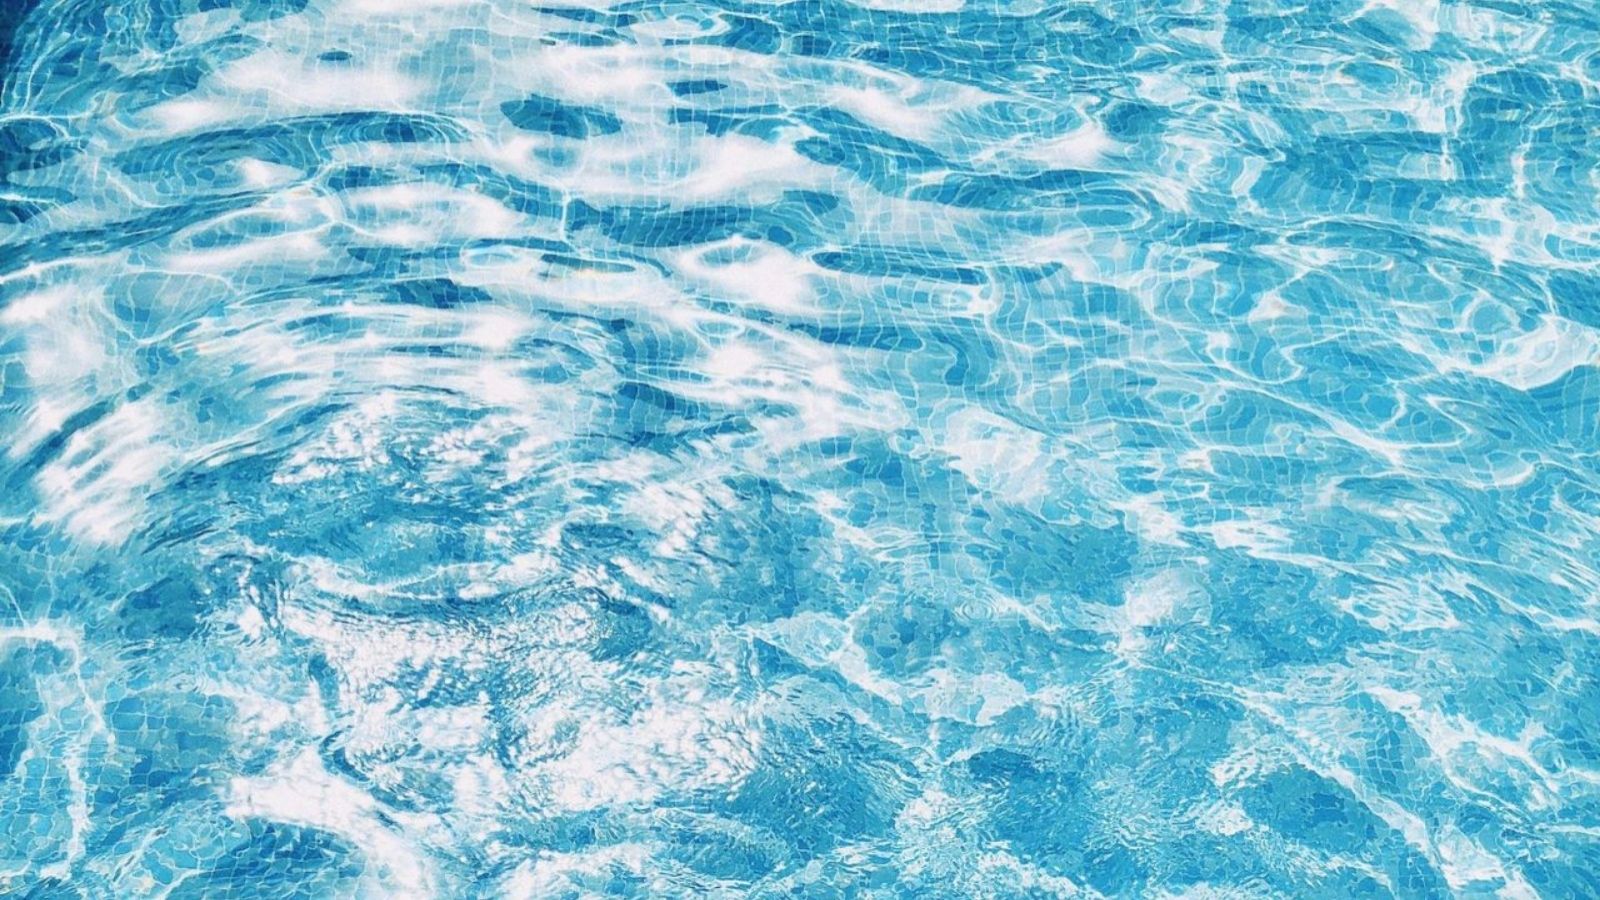 Two children died after being pulled from backyard pool in Phoenix...